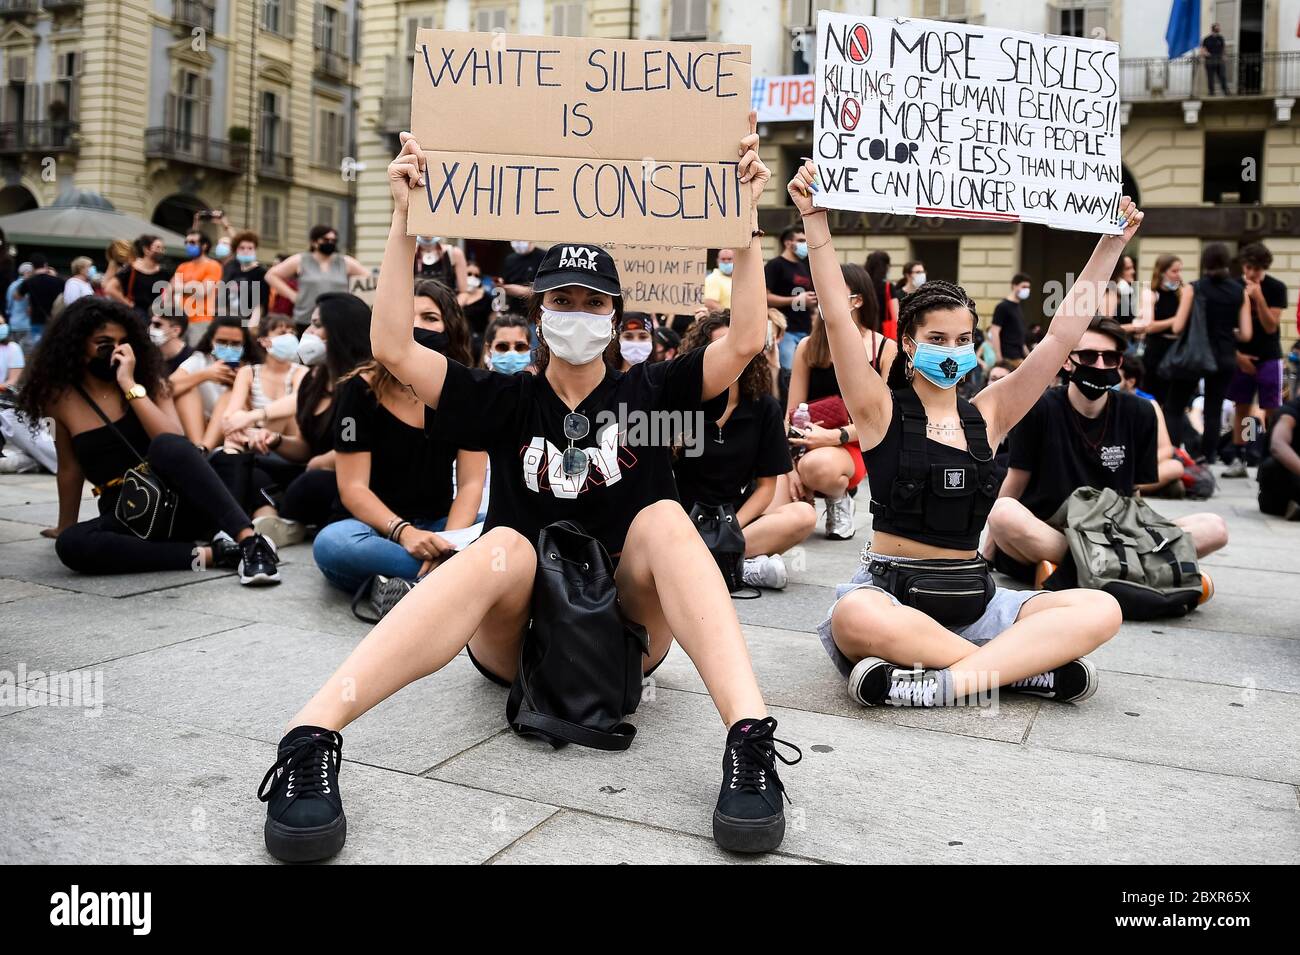 Turin, Italy - 06 June, 2020: Protesters hold placards reading 'White silence is white consent' and 'No more sensless killing of human Beings!! No more seeing people of color as less than human. We can no longer look away!!' during a demonstration calling for justice for George Floyd, who died May 25 after being restrained by police in Minneapolis, USA. People have protested peacefully in Turin to show solidarity with anti-racism movement Black Lives Matter in the U.S. and elsewhere. Credit: Nicolò Campo/Alamy Live News Stock Photo